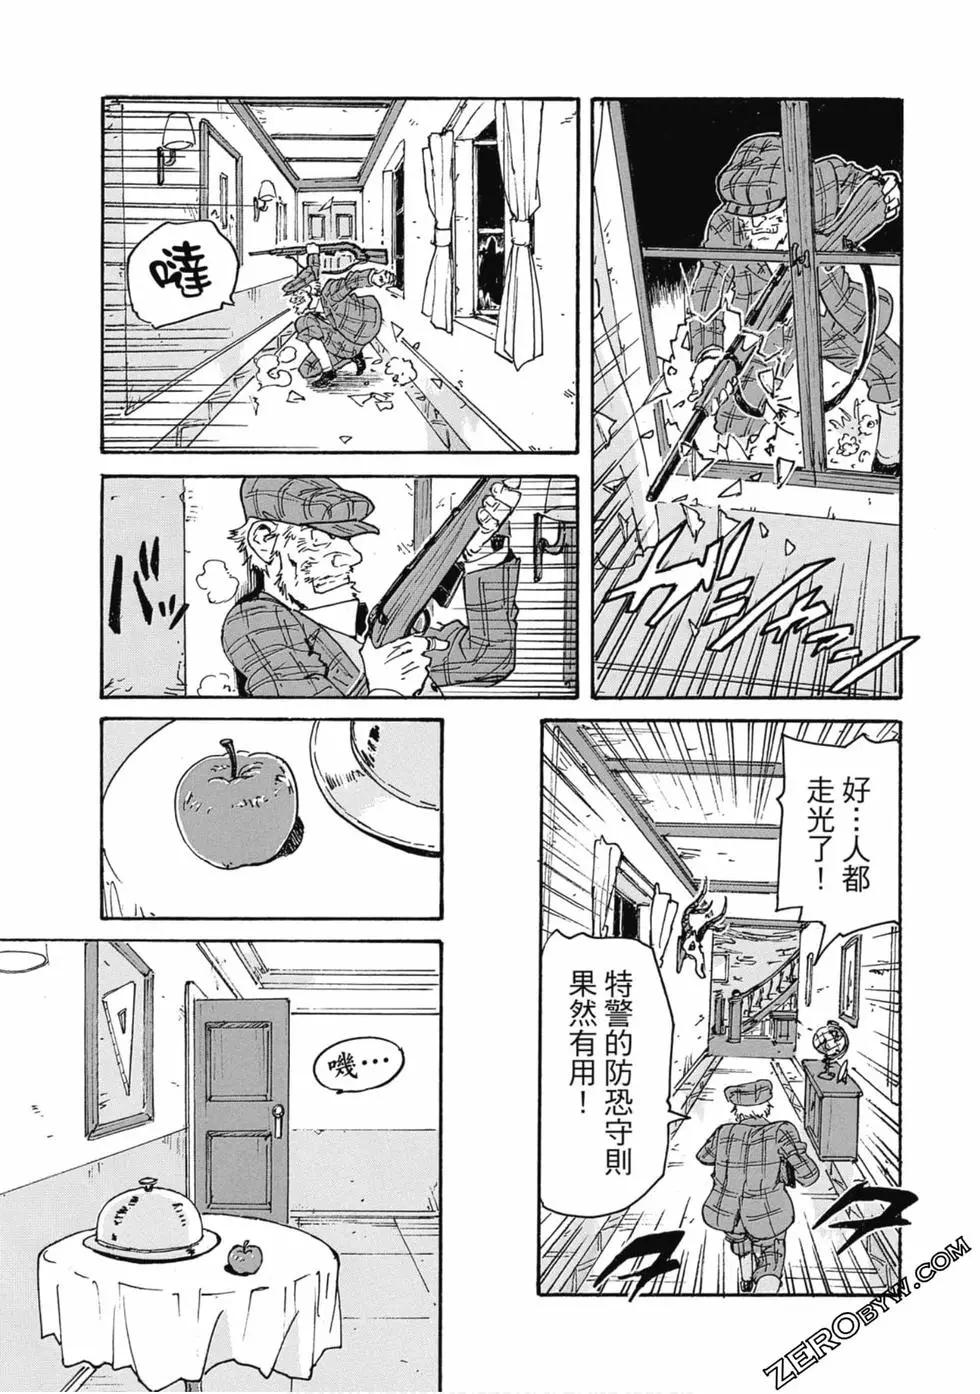 CANDY & CIGARETTES - 第04卷(1/4) - 2